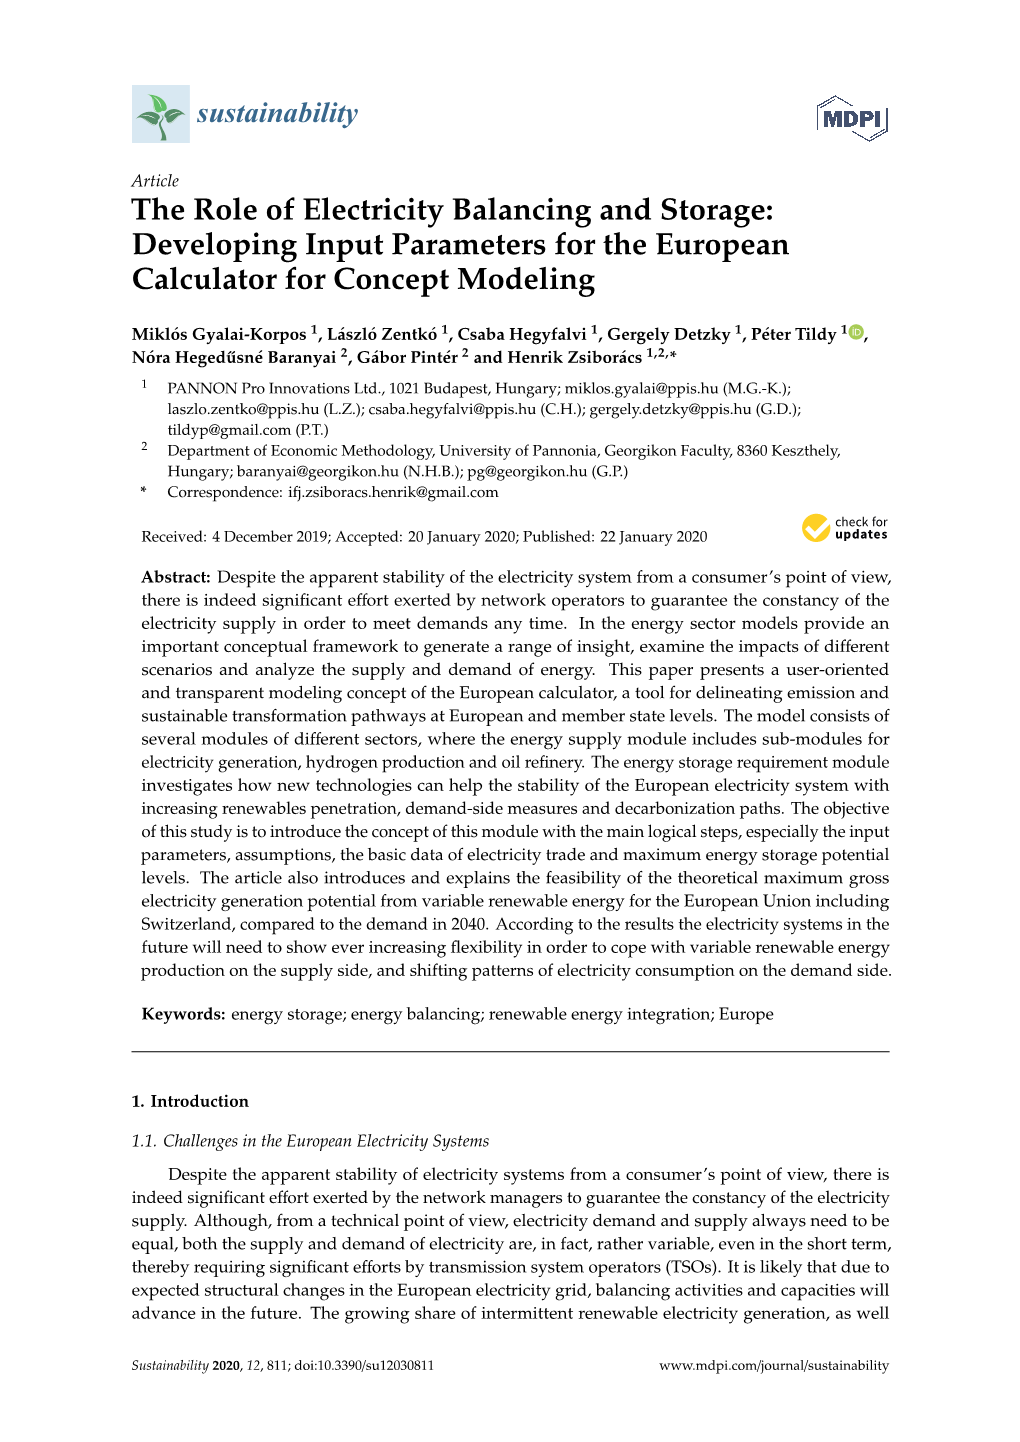 The Role of Electricity Balancing and Storage: Developing Input Parameters for the European Calculator for Concept Modeling